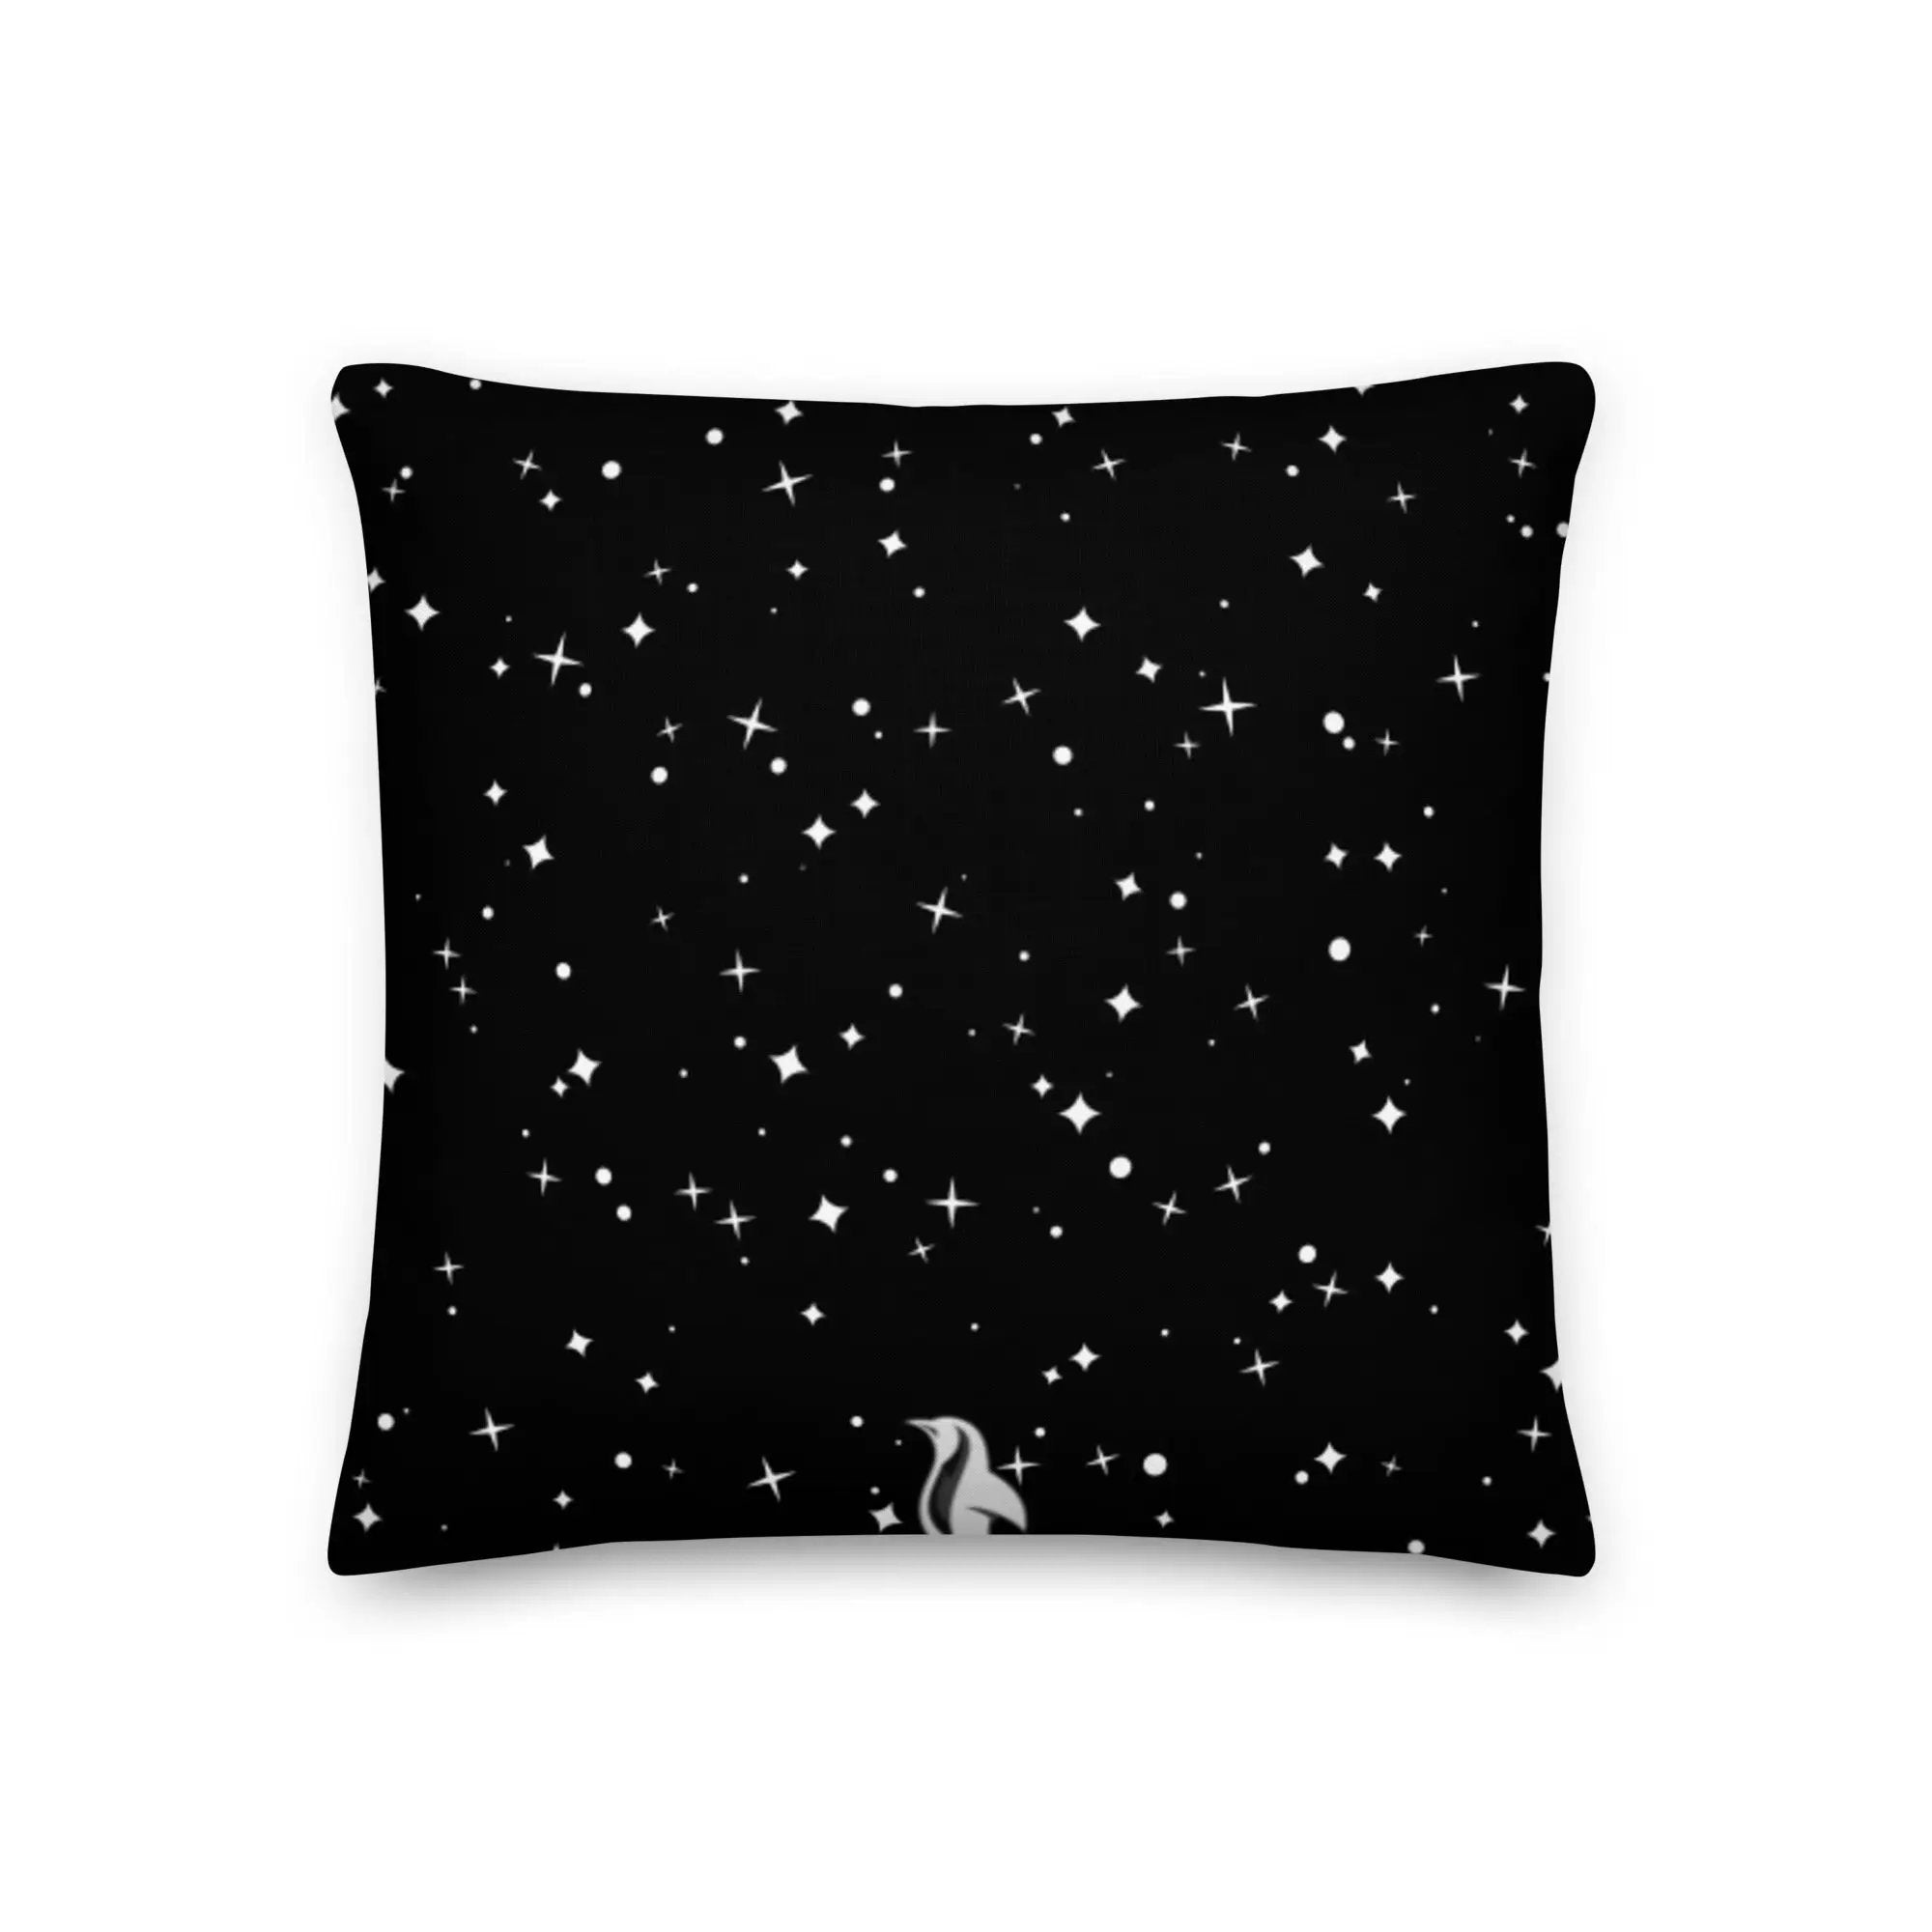 Battle Of The Planets Premium Pillow